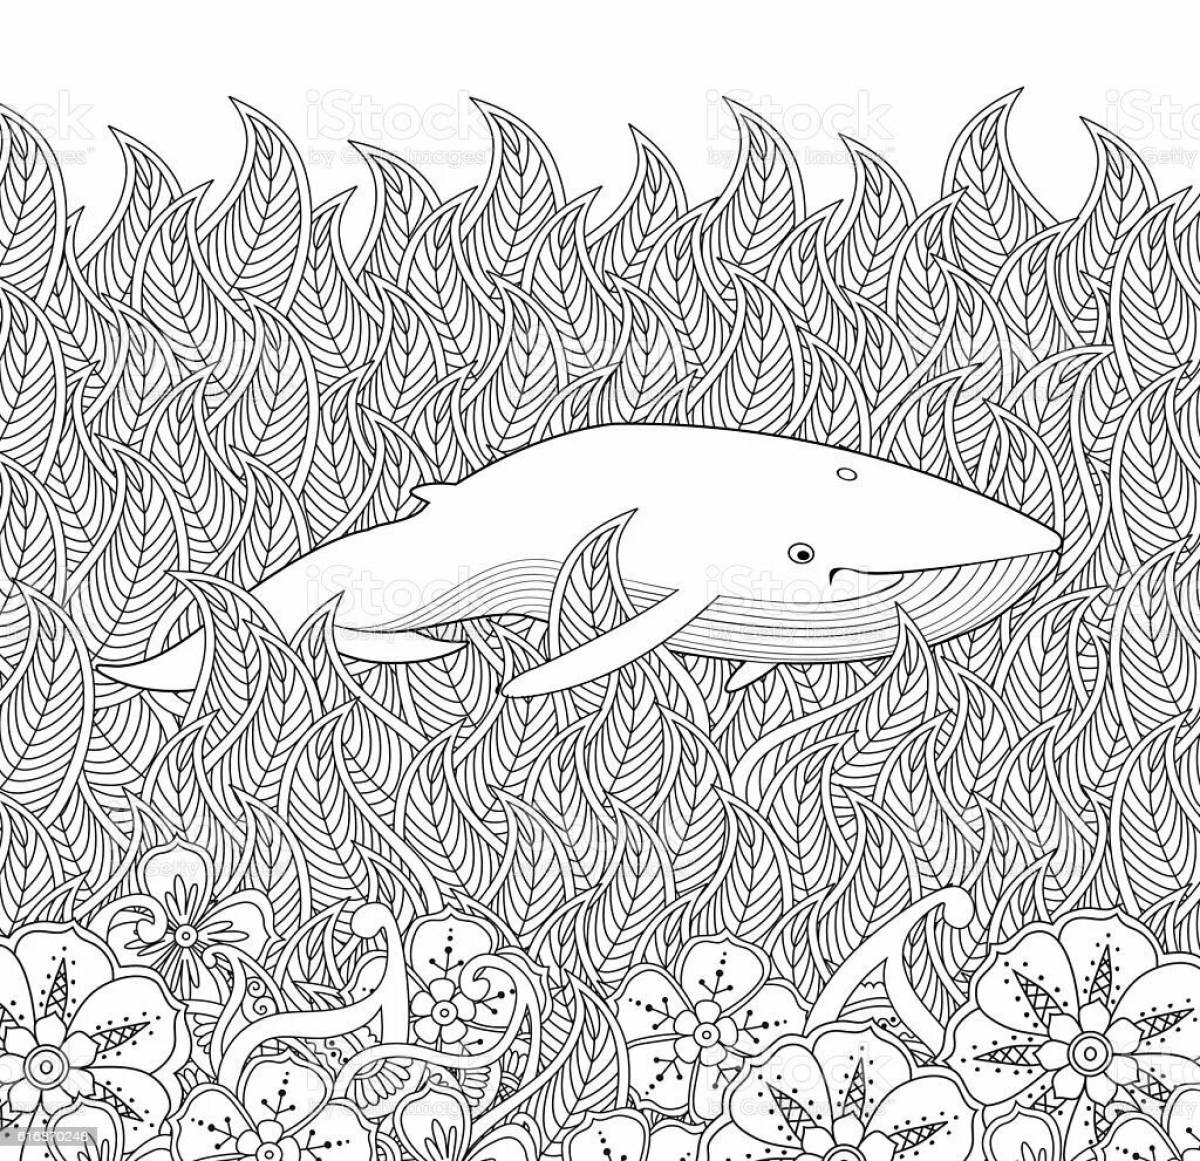 Charming coloring antistress whale